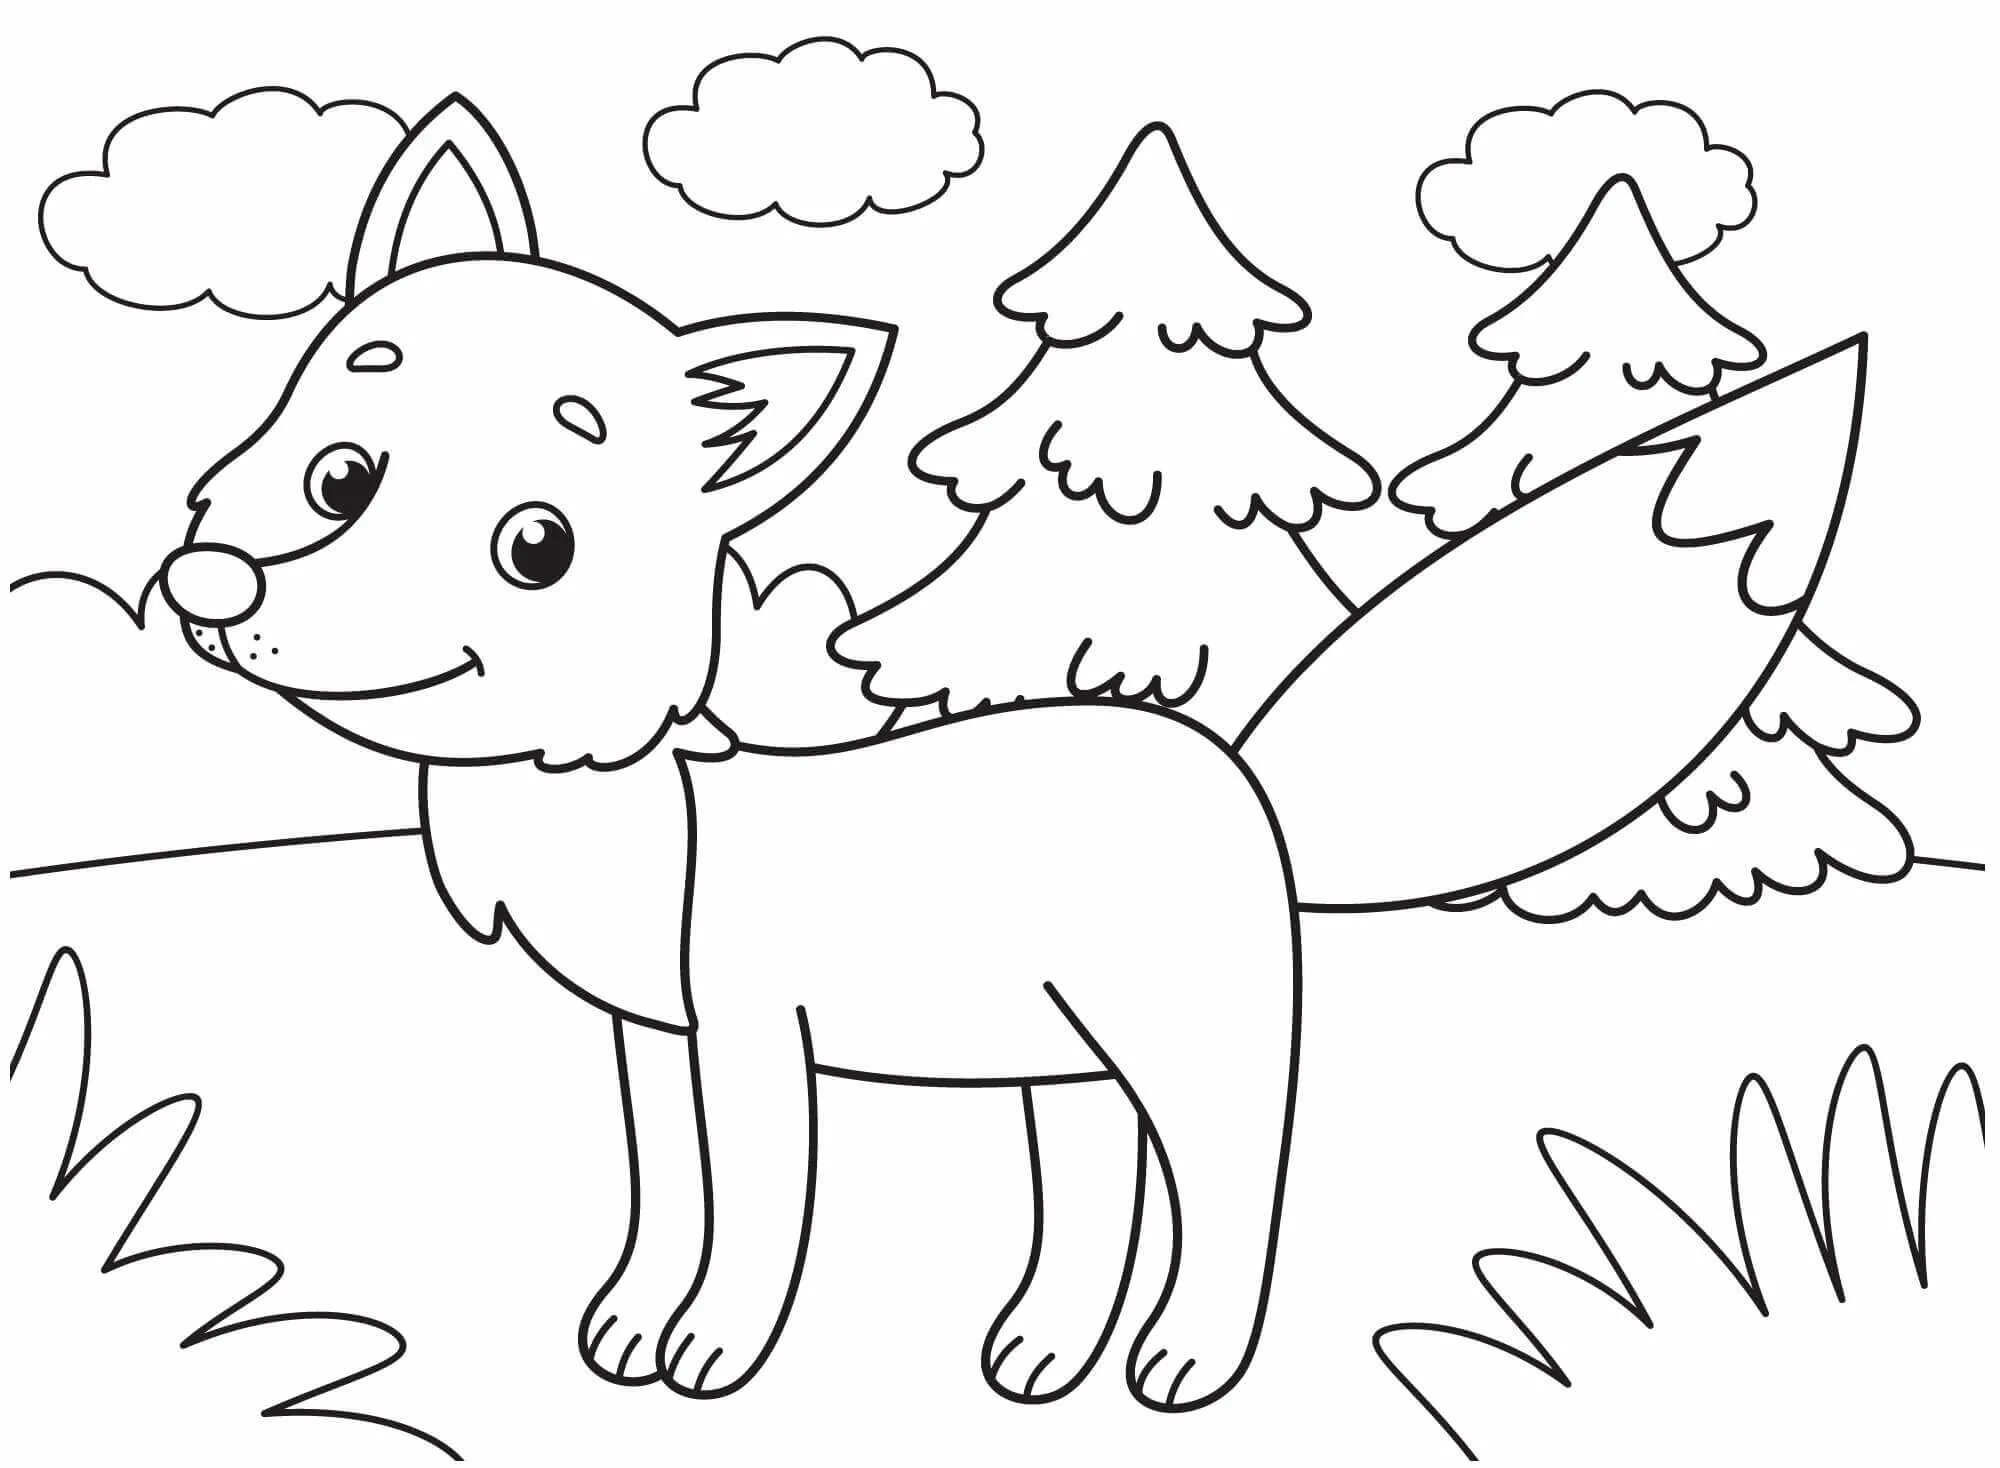 Fun coloring fox for 3-4 year olds